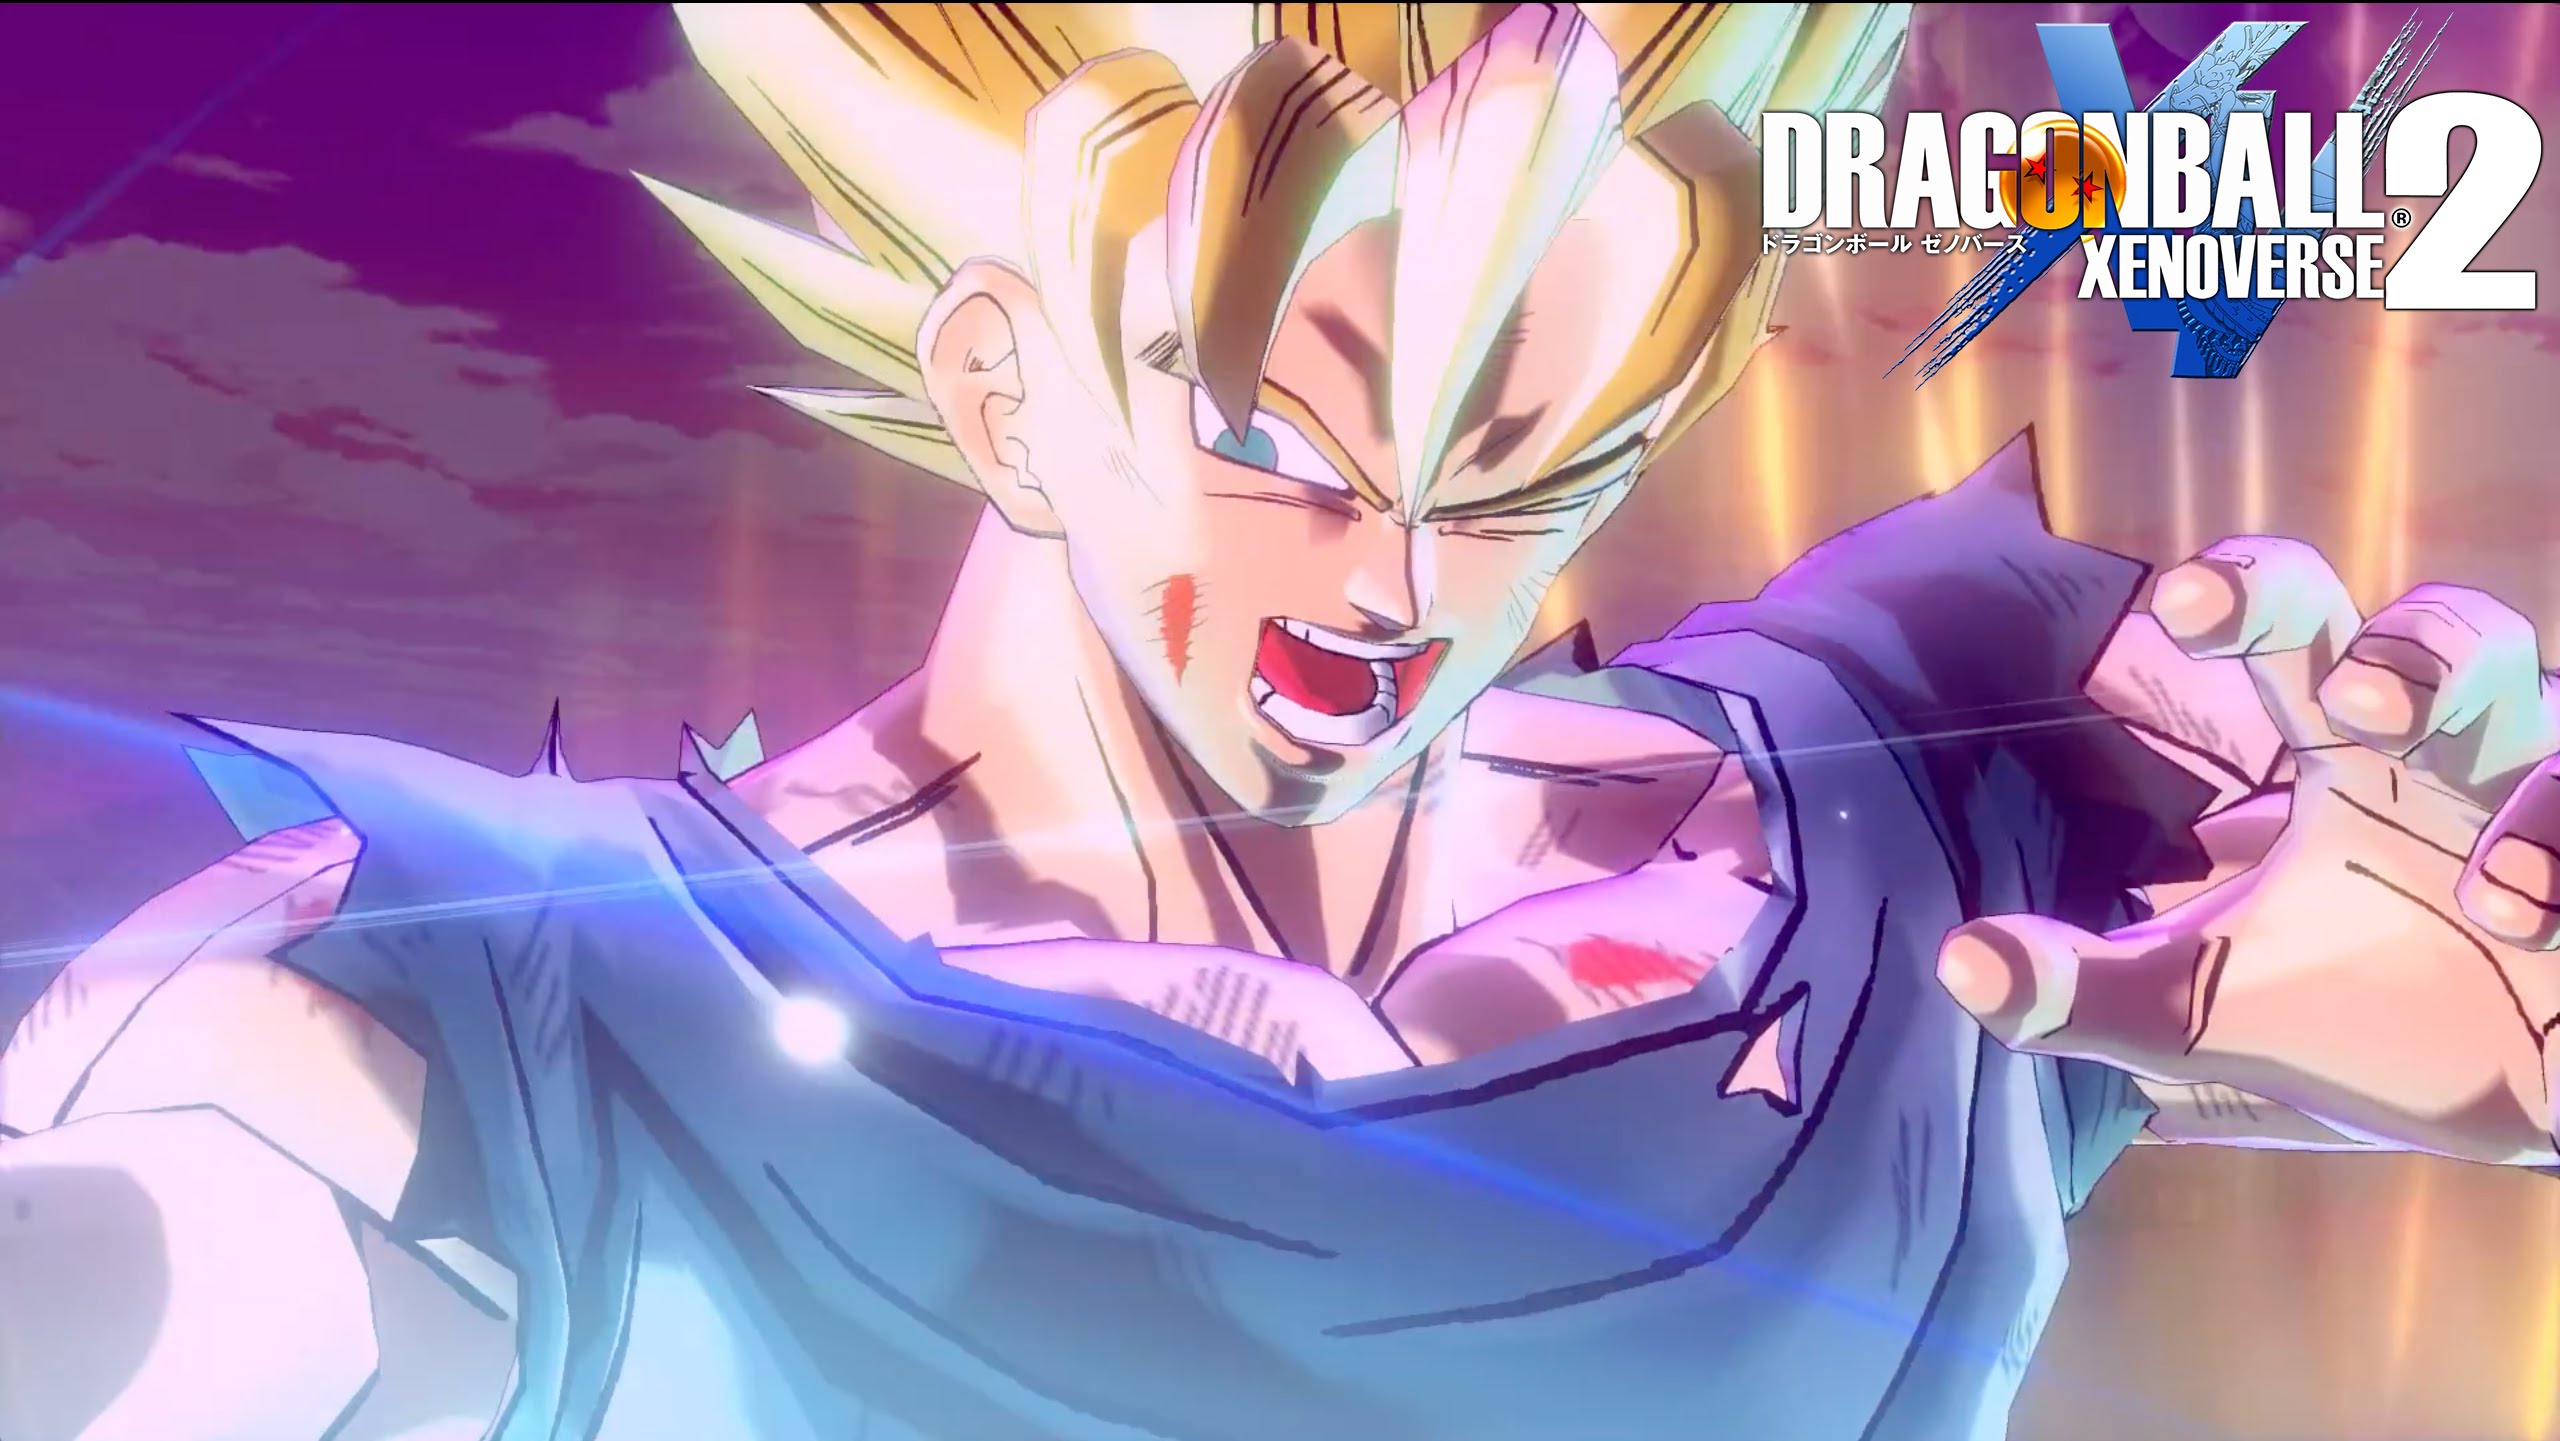 ‘Dragonball Xenoverse 2’ coming to Xbox One October 25